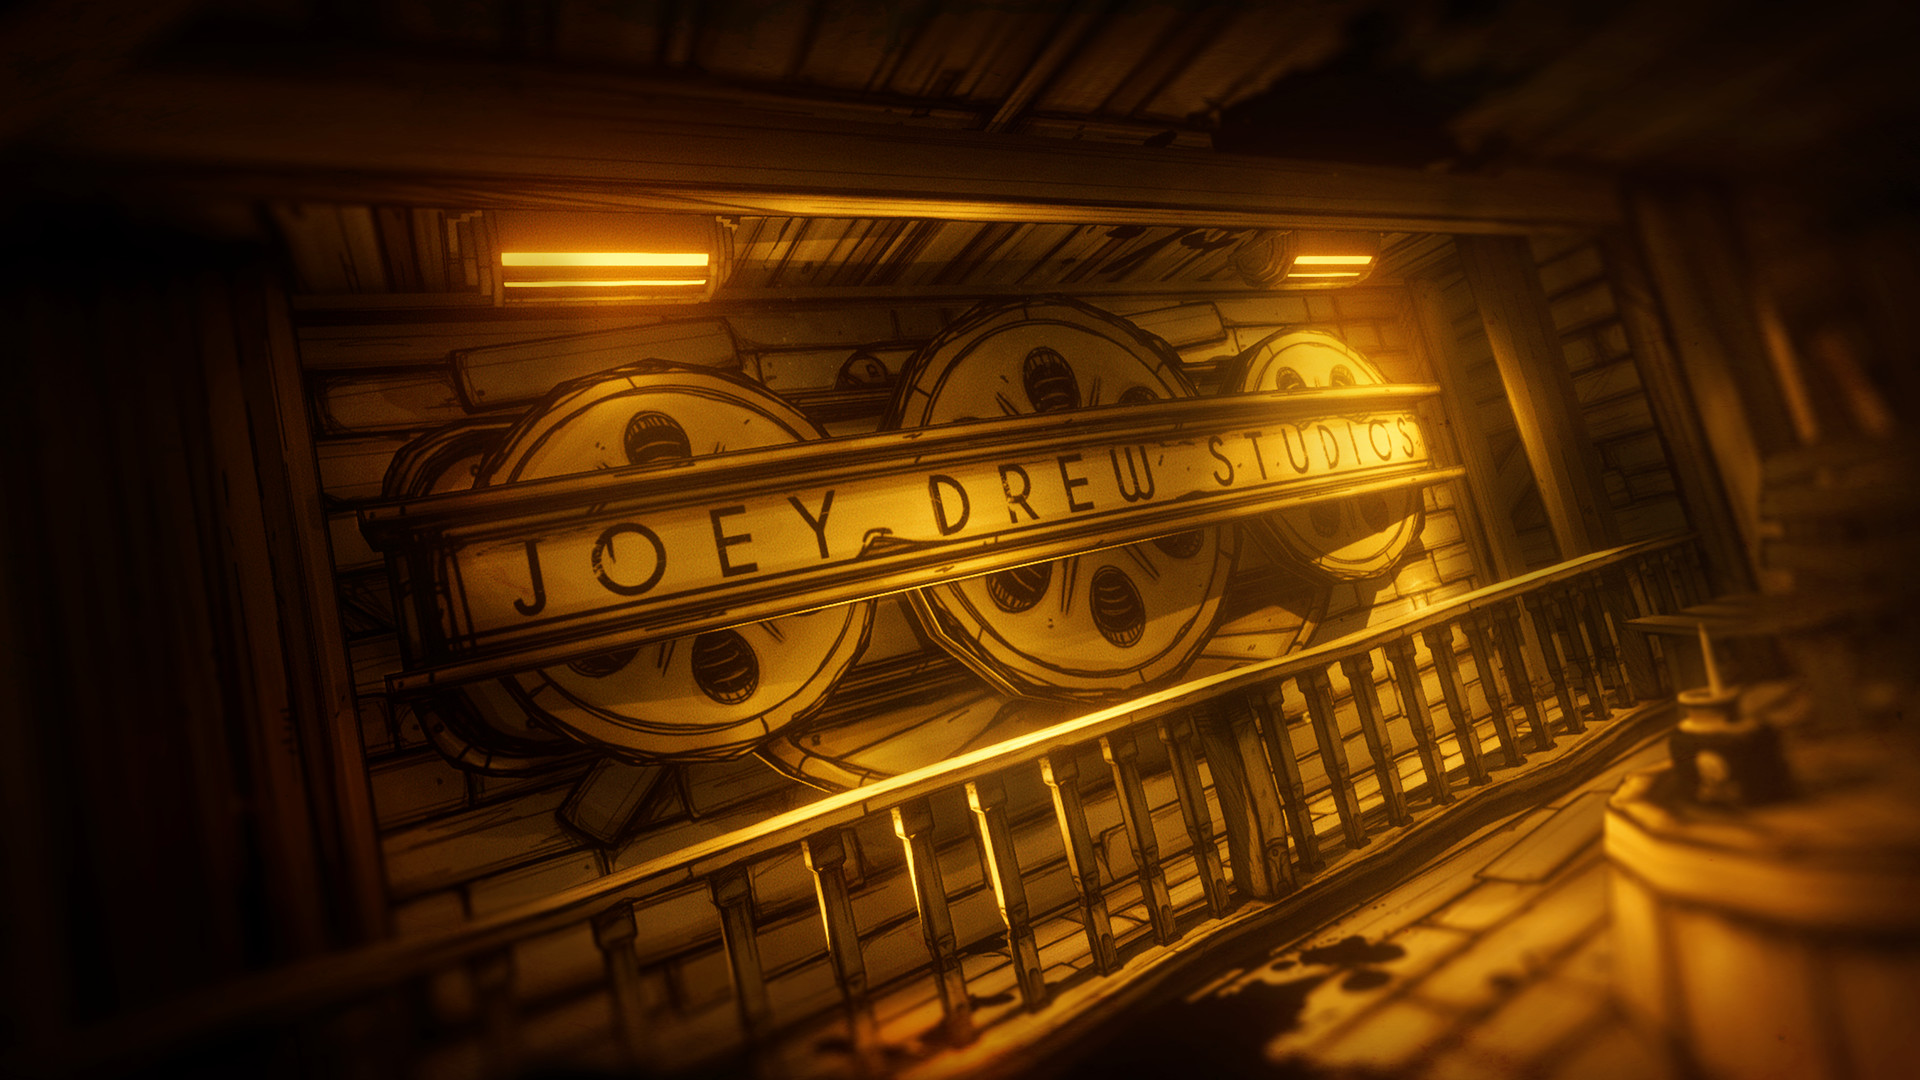 Download Bendy and the Ink Machine Complete Edition Torrent para pc via torrent